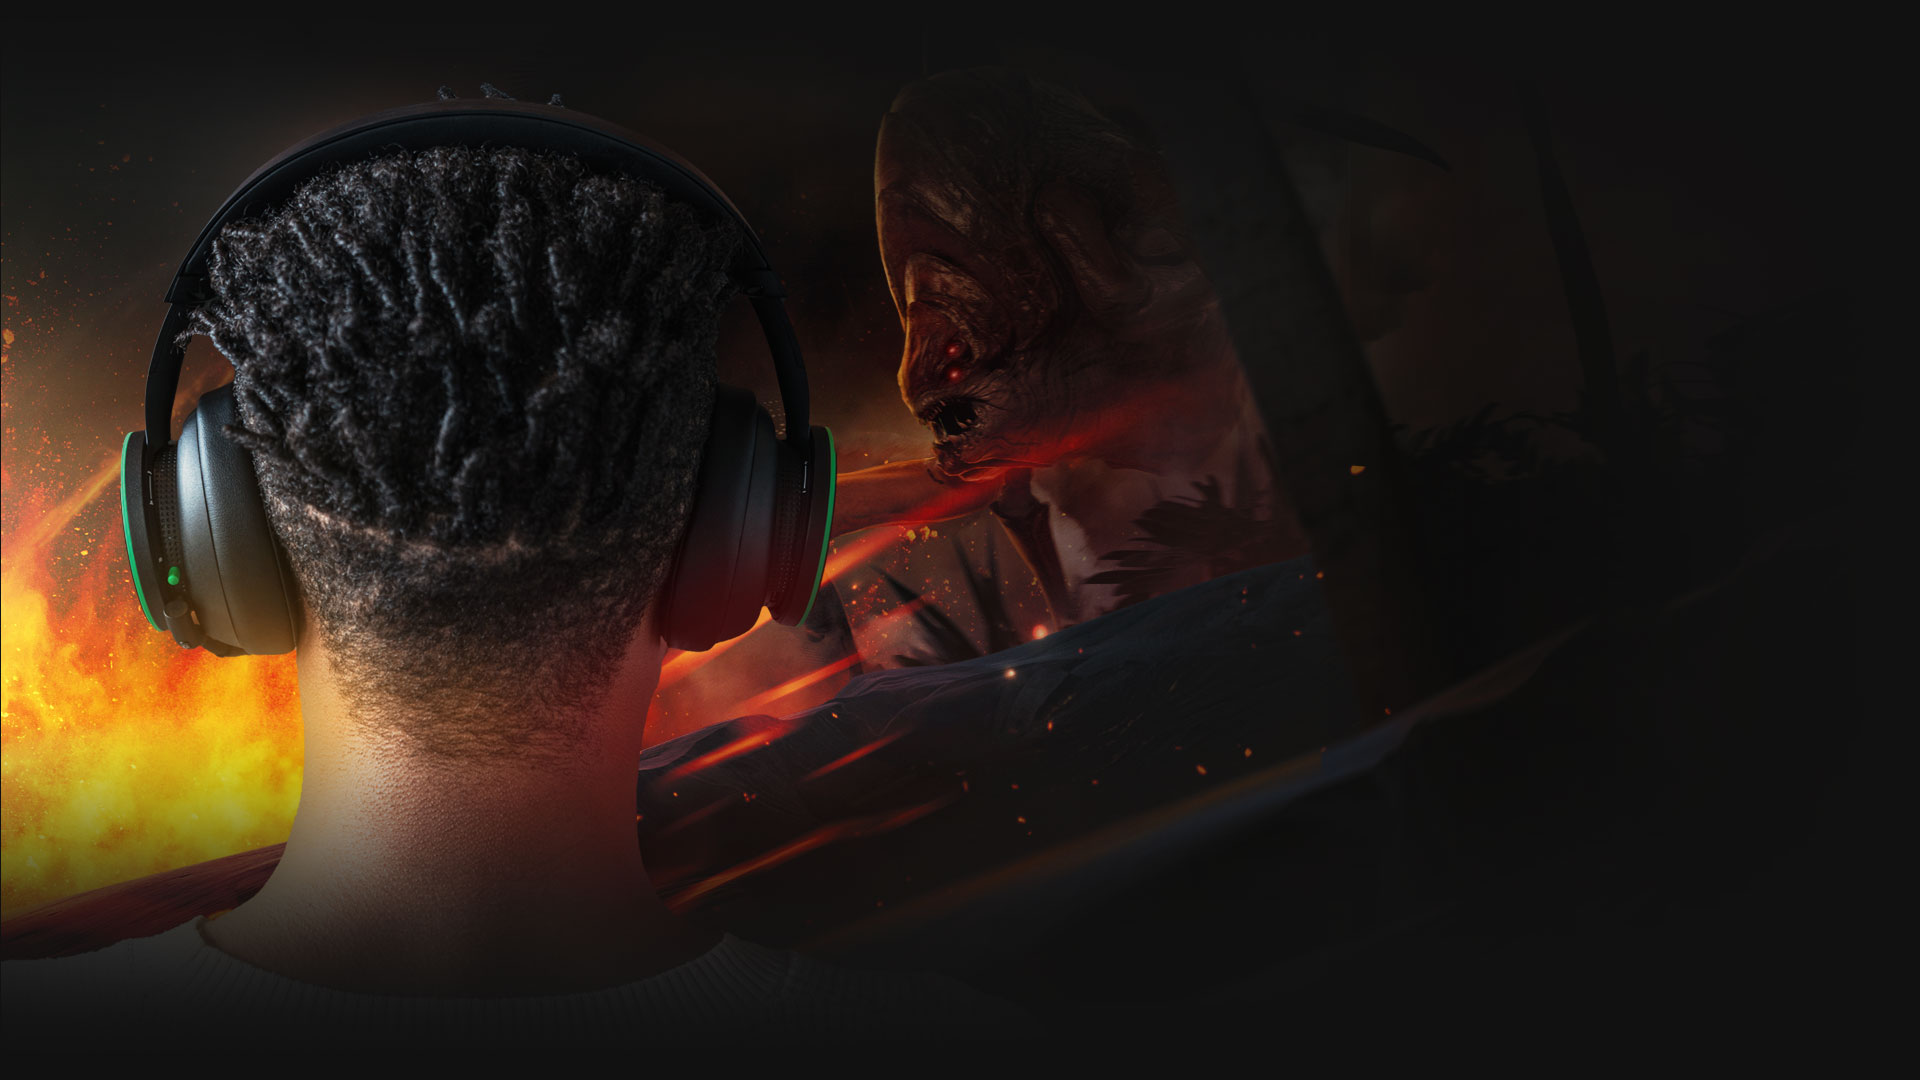 A man faces down The Swarm in Gears 5: Hivebusters while wearing the Xbox Wireless Headset.